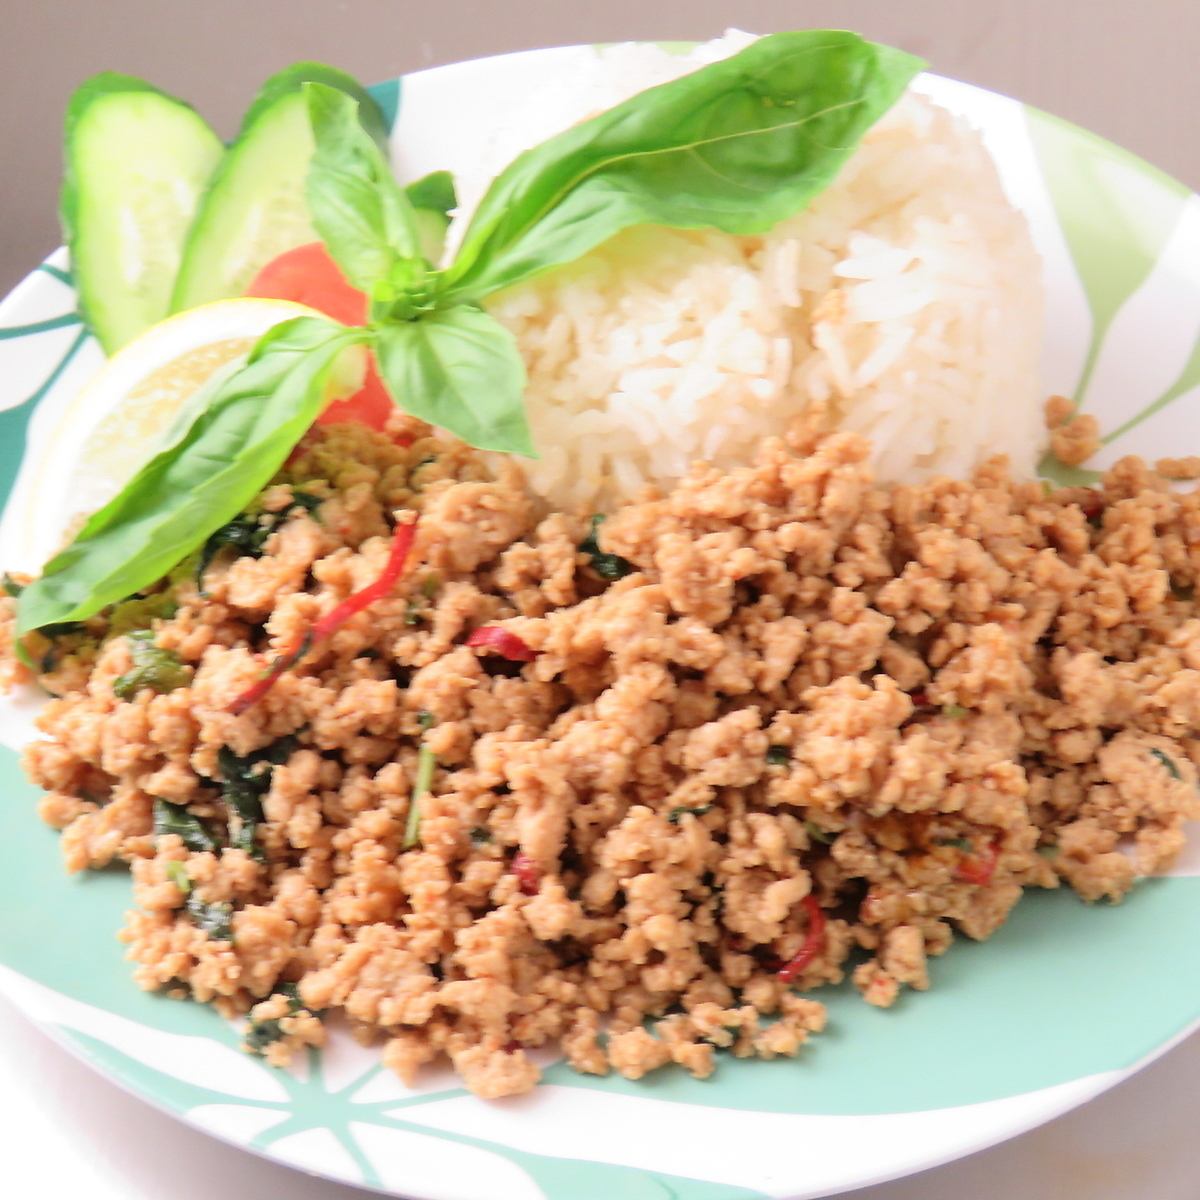 A 5-minute walk from Kanayama Station, Thai cuisine is NEW!